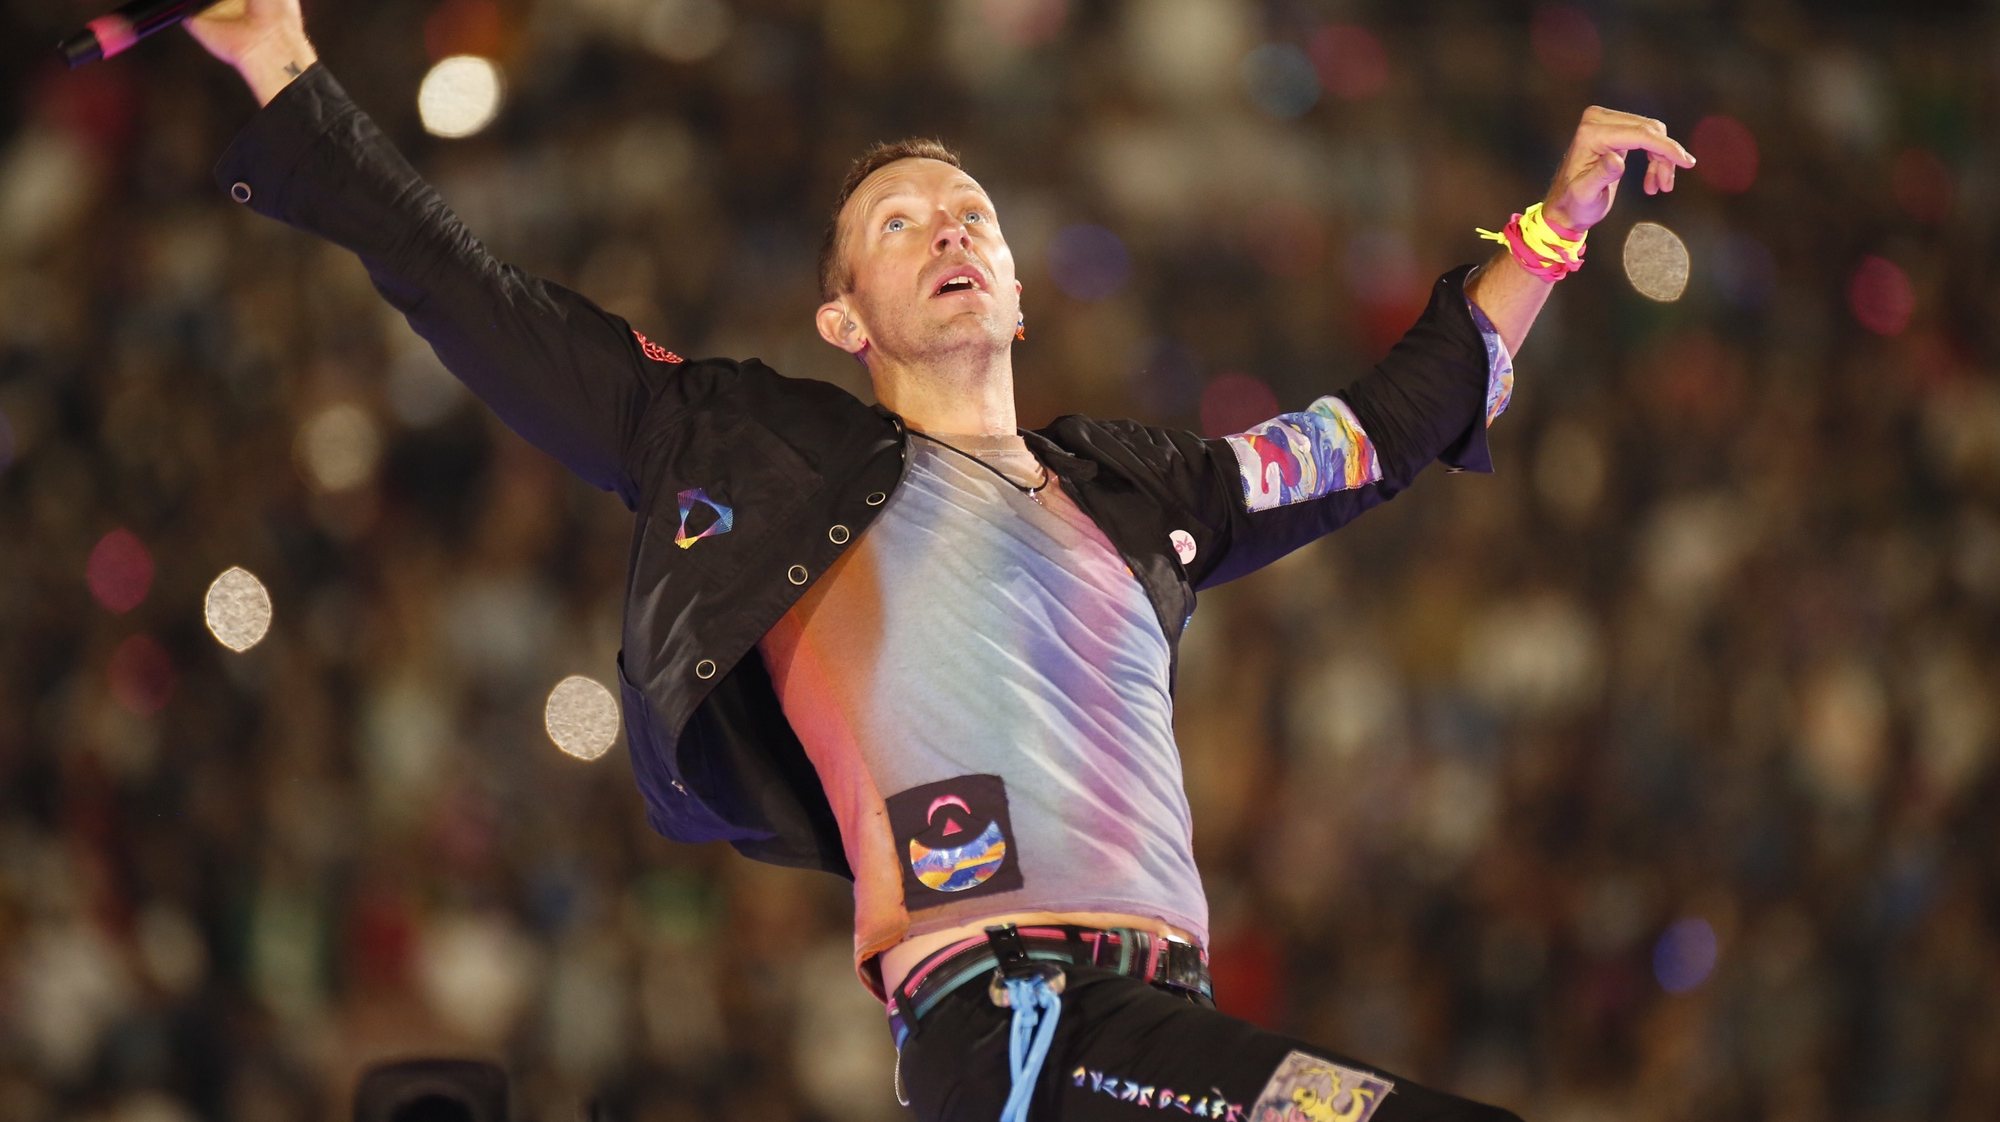 epa09859918 The vocalist of the British rock-pop band Coldplay Chris Martin performs, as part of his &#039;Music of the Spheres&#039; world tour, at the Akron Stadium in Zapopan, Jalisco state, Mexico, 29 March 2022.  EPA/Francisco Guasco